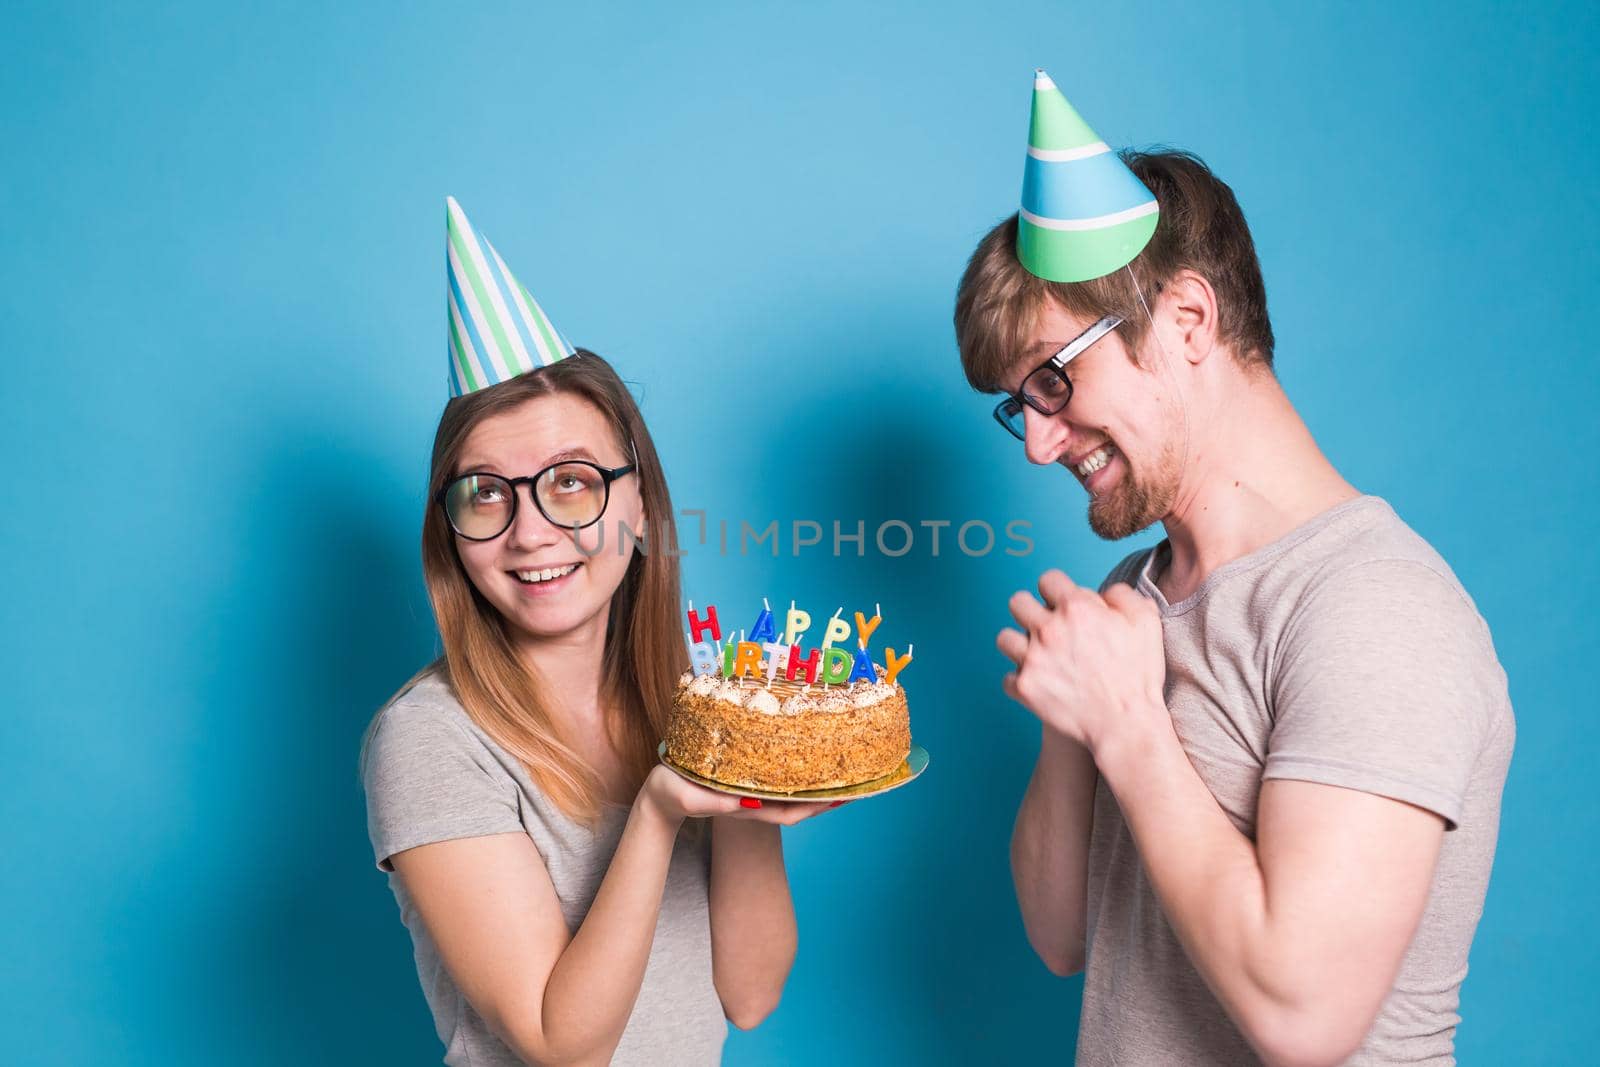 Funny young girl congratulates her boyfriend happy birthday holding a cake with candles in her hands standing on a blue background by Satura86